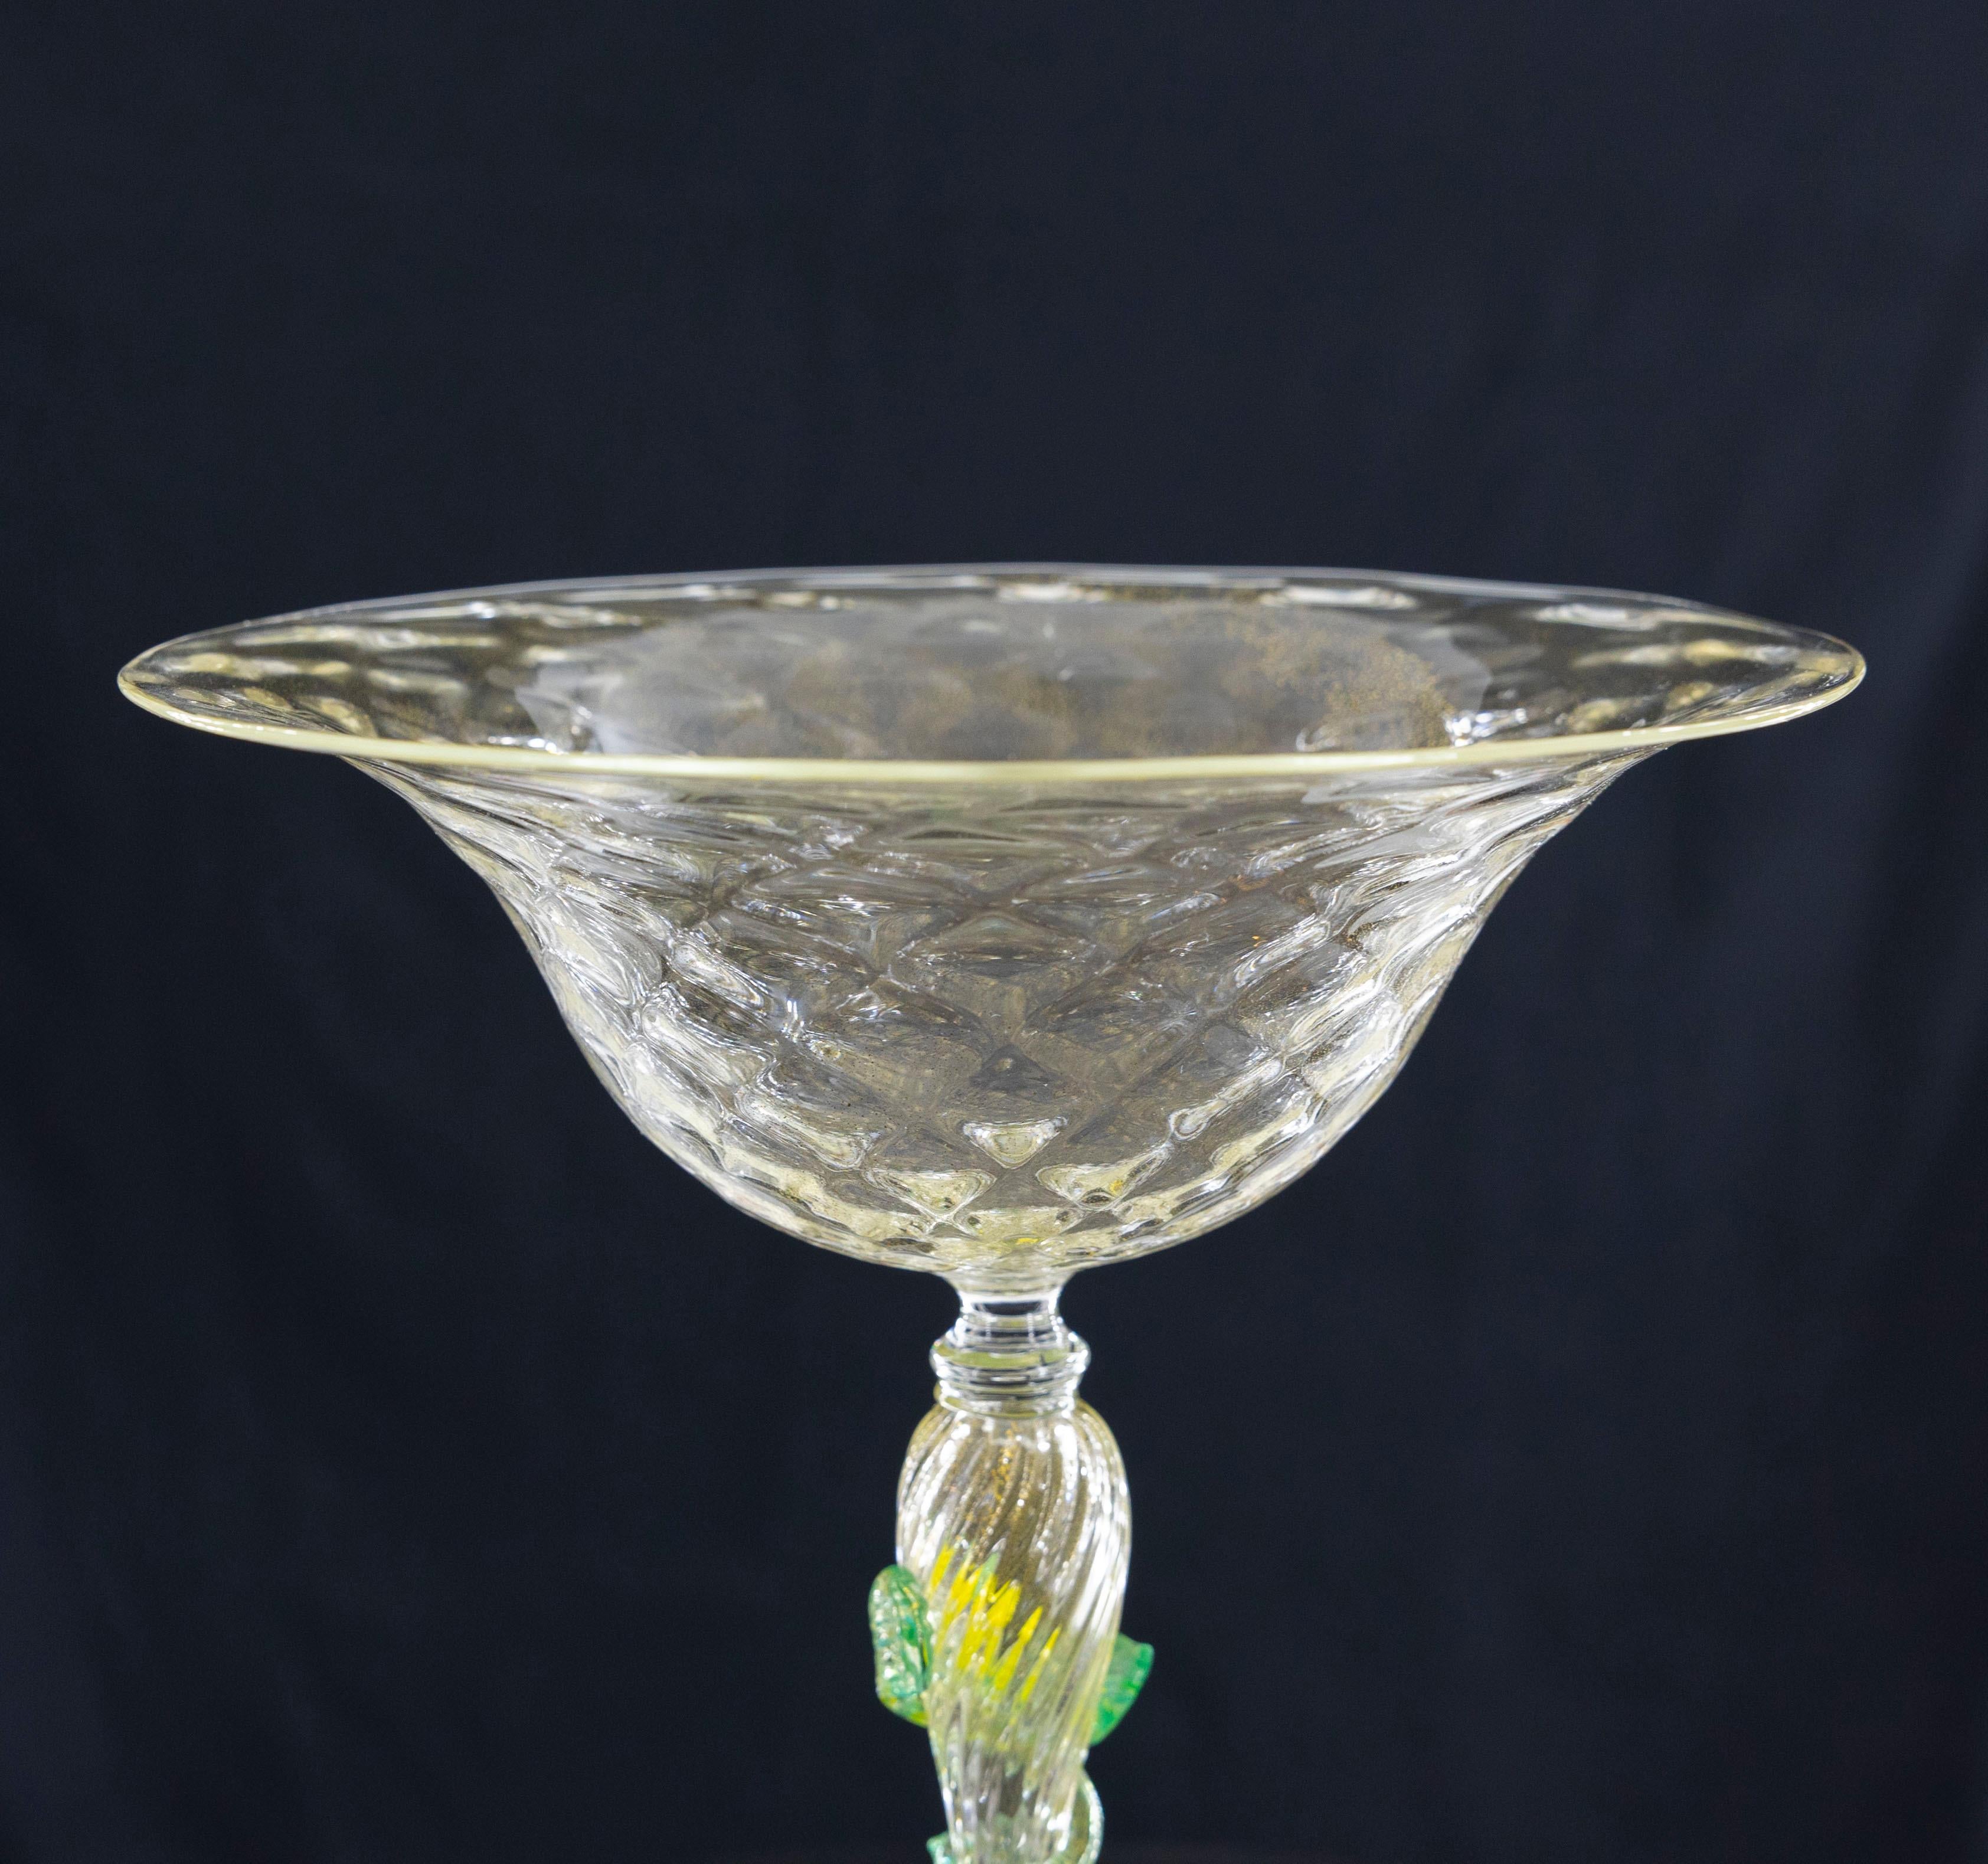 Transparent Venetian Murano Stem Glass with Gold Finishes Italy 1990s For Sale 1